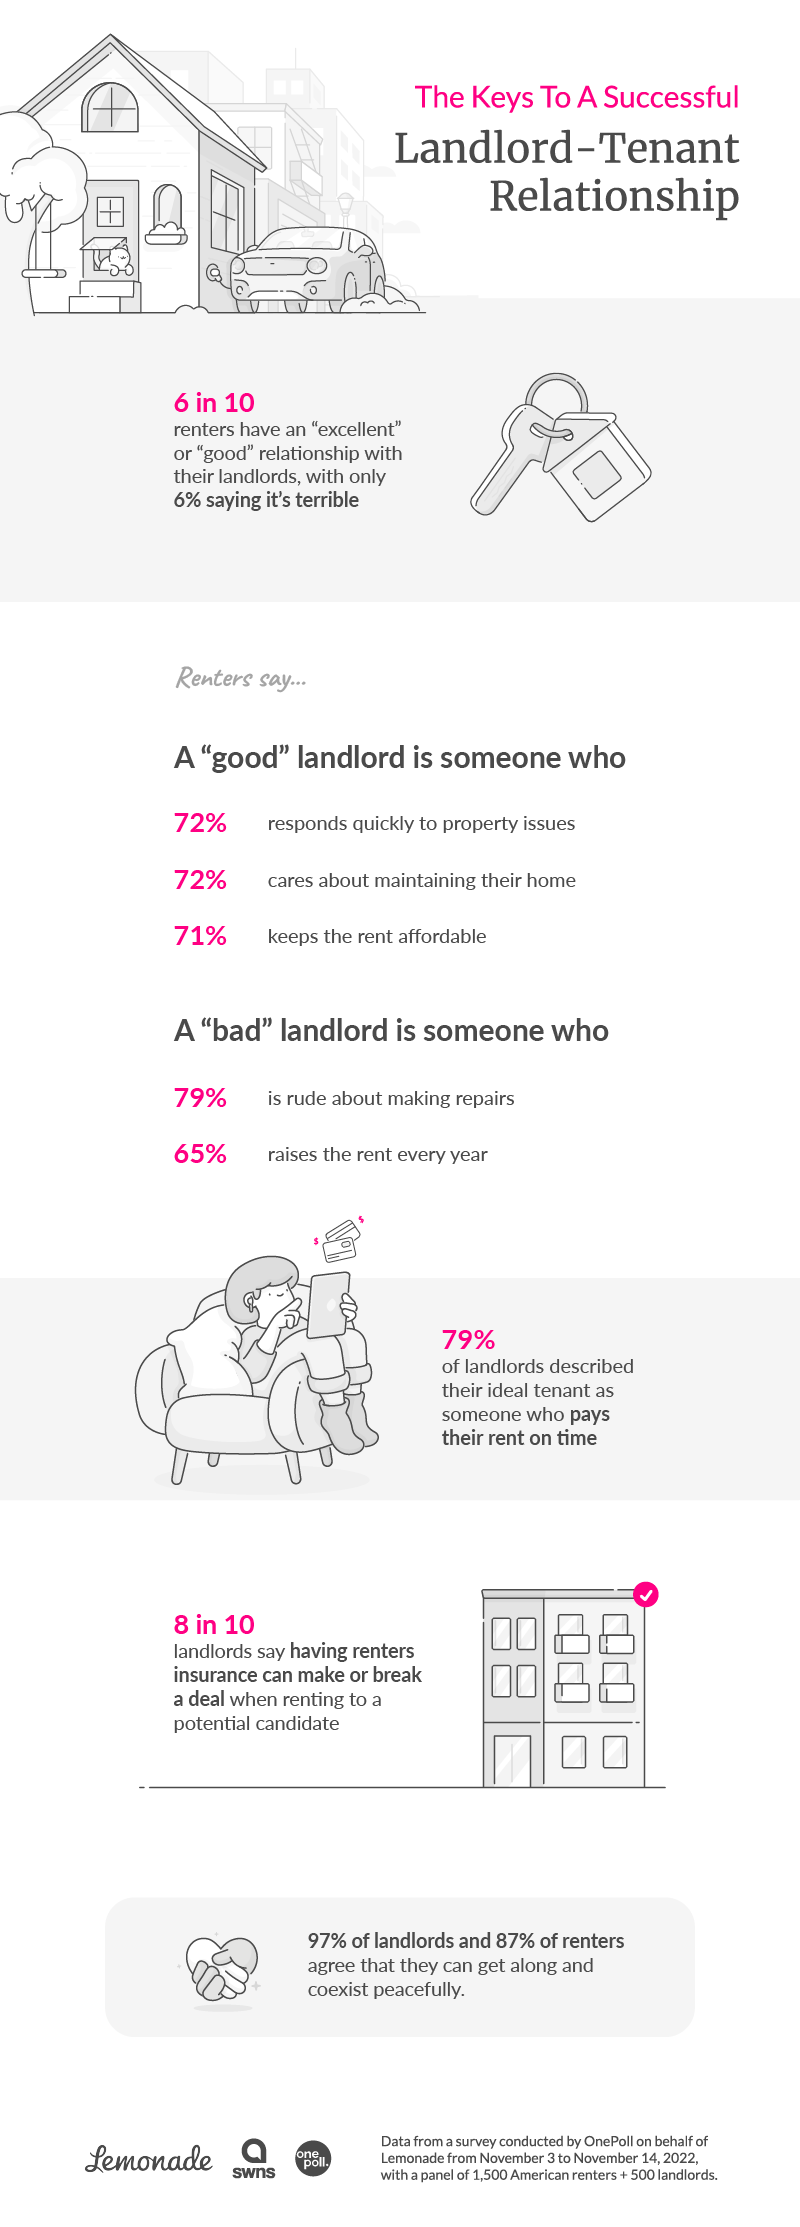 keys to a successful landlord-tenant relationship